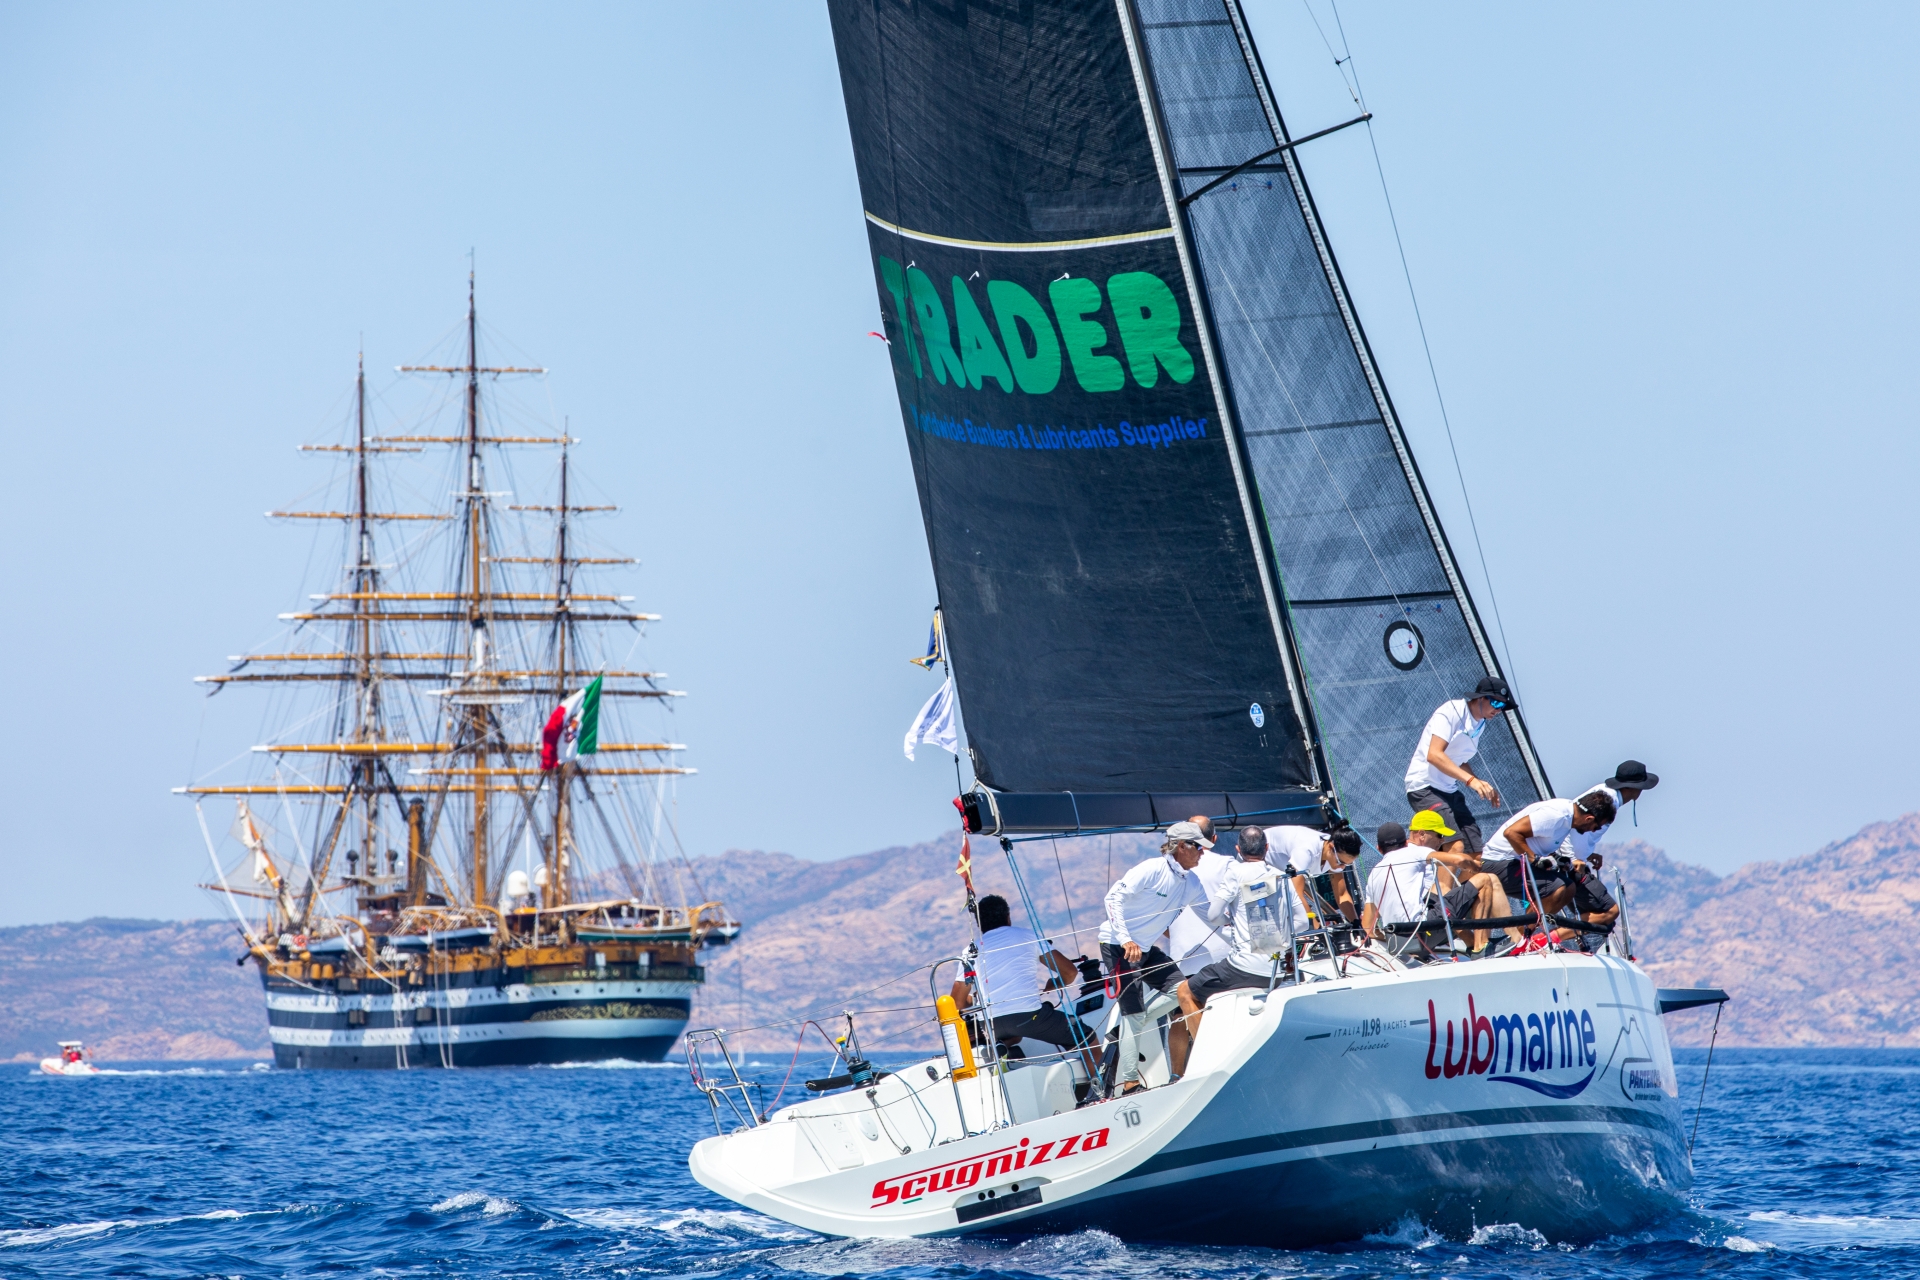 Scugnizza is the overall winner of the first edition of the Italia Yachts Sailing Week - NEWS - Yacht Club Costa Smeralda